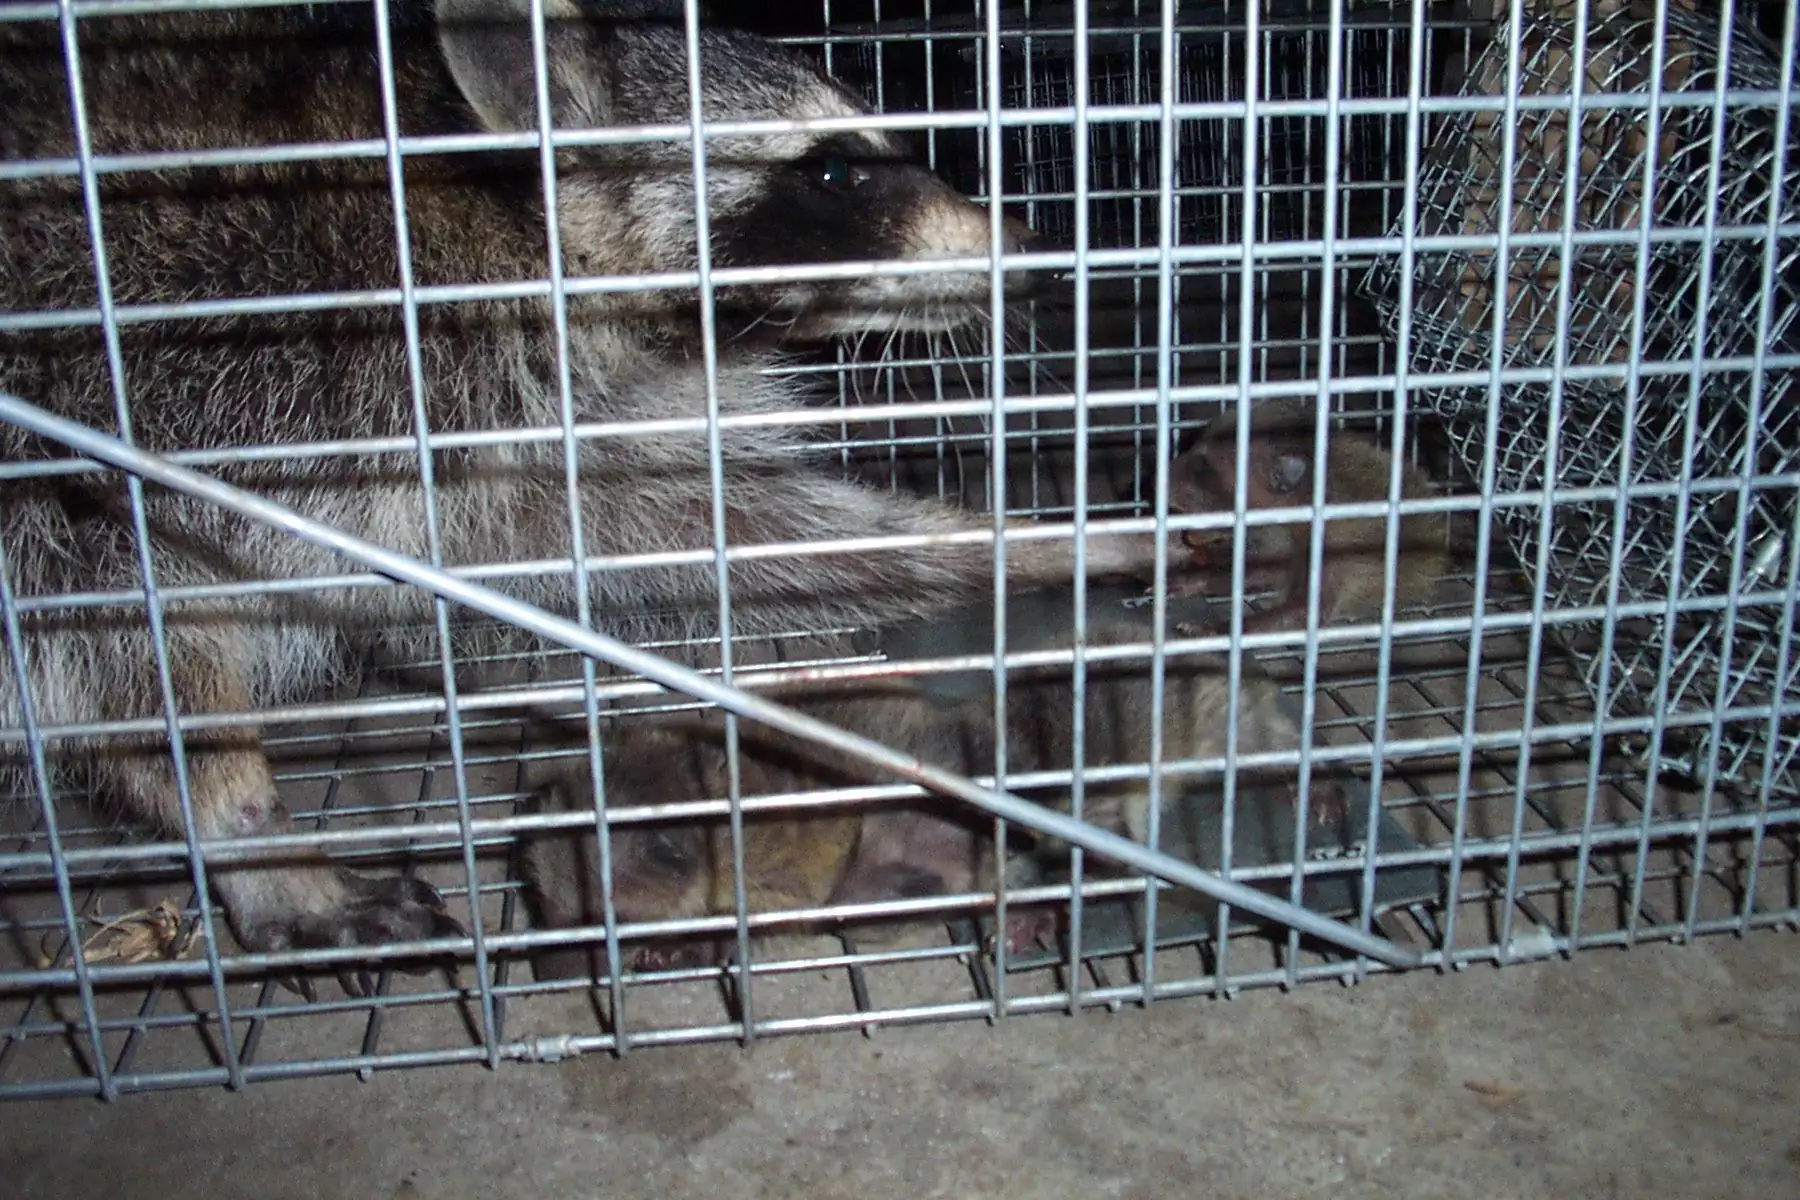 raccoons in walls generally have to be removed by a professional wildlife company